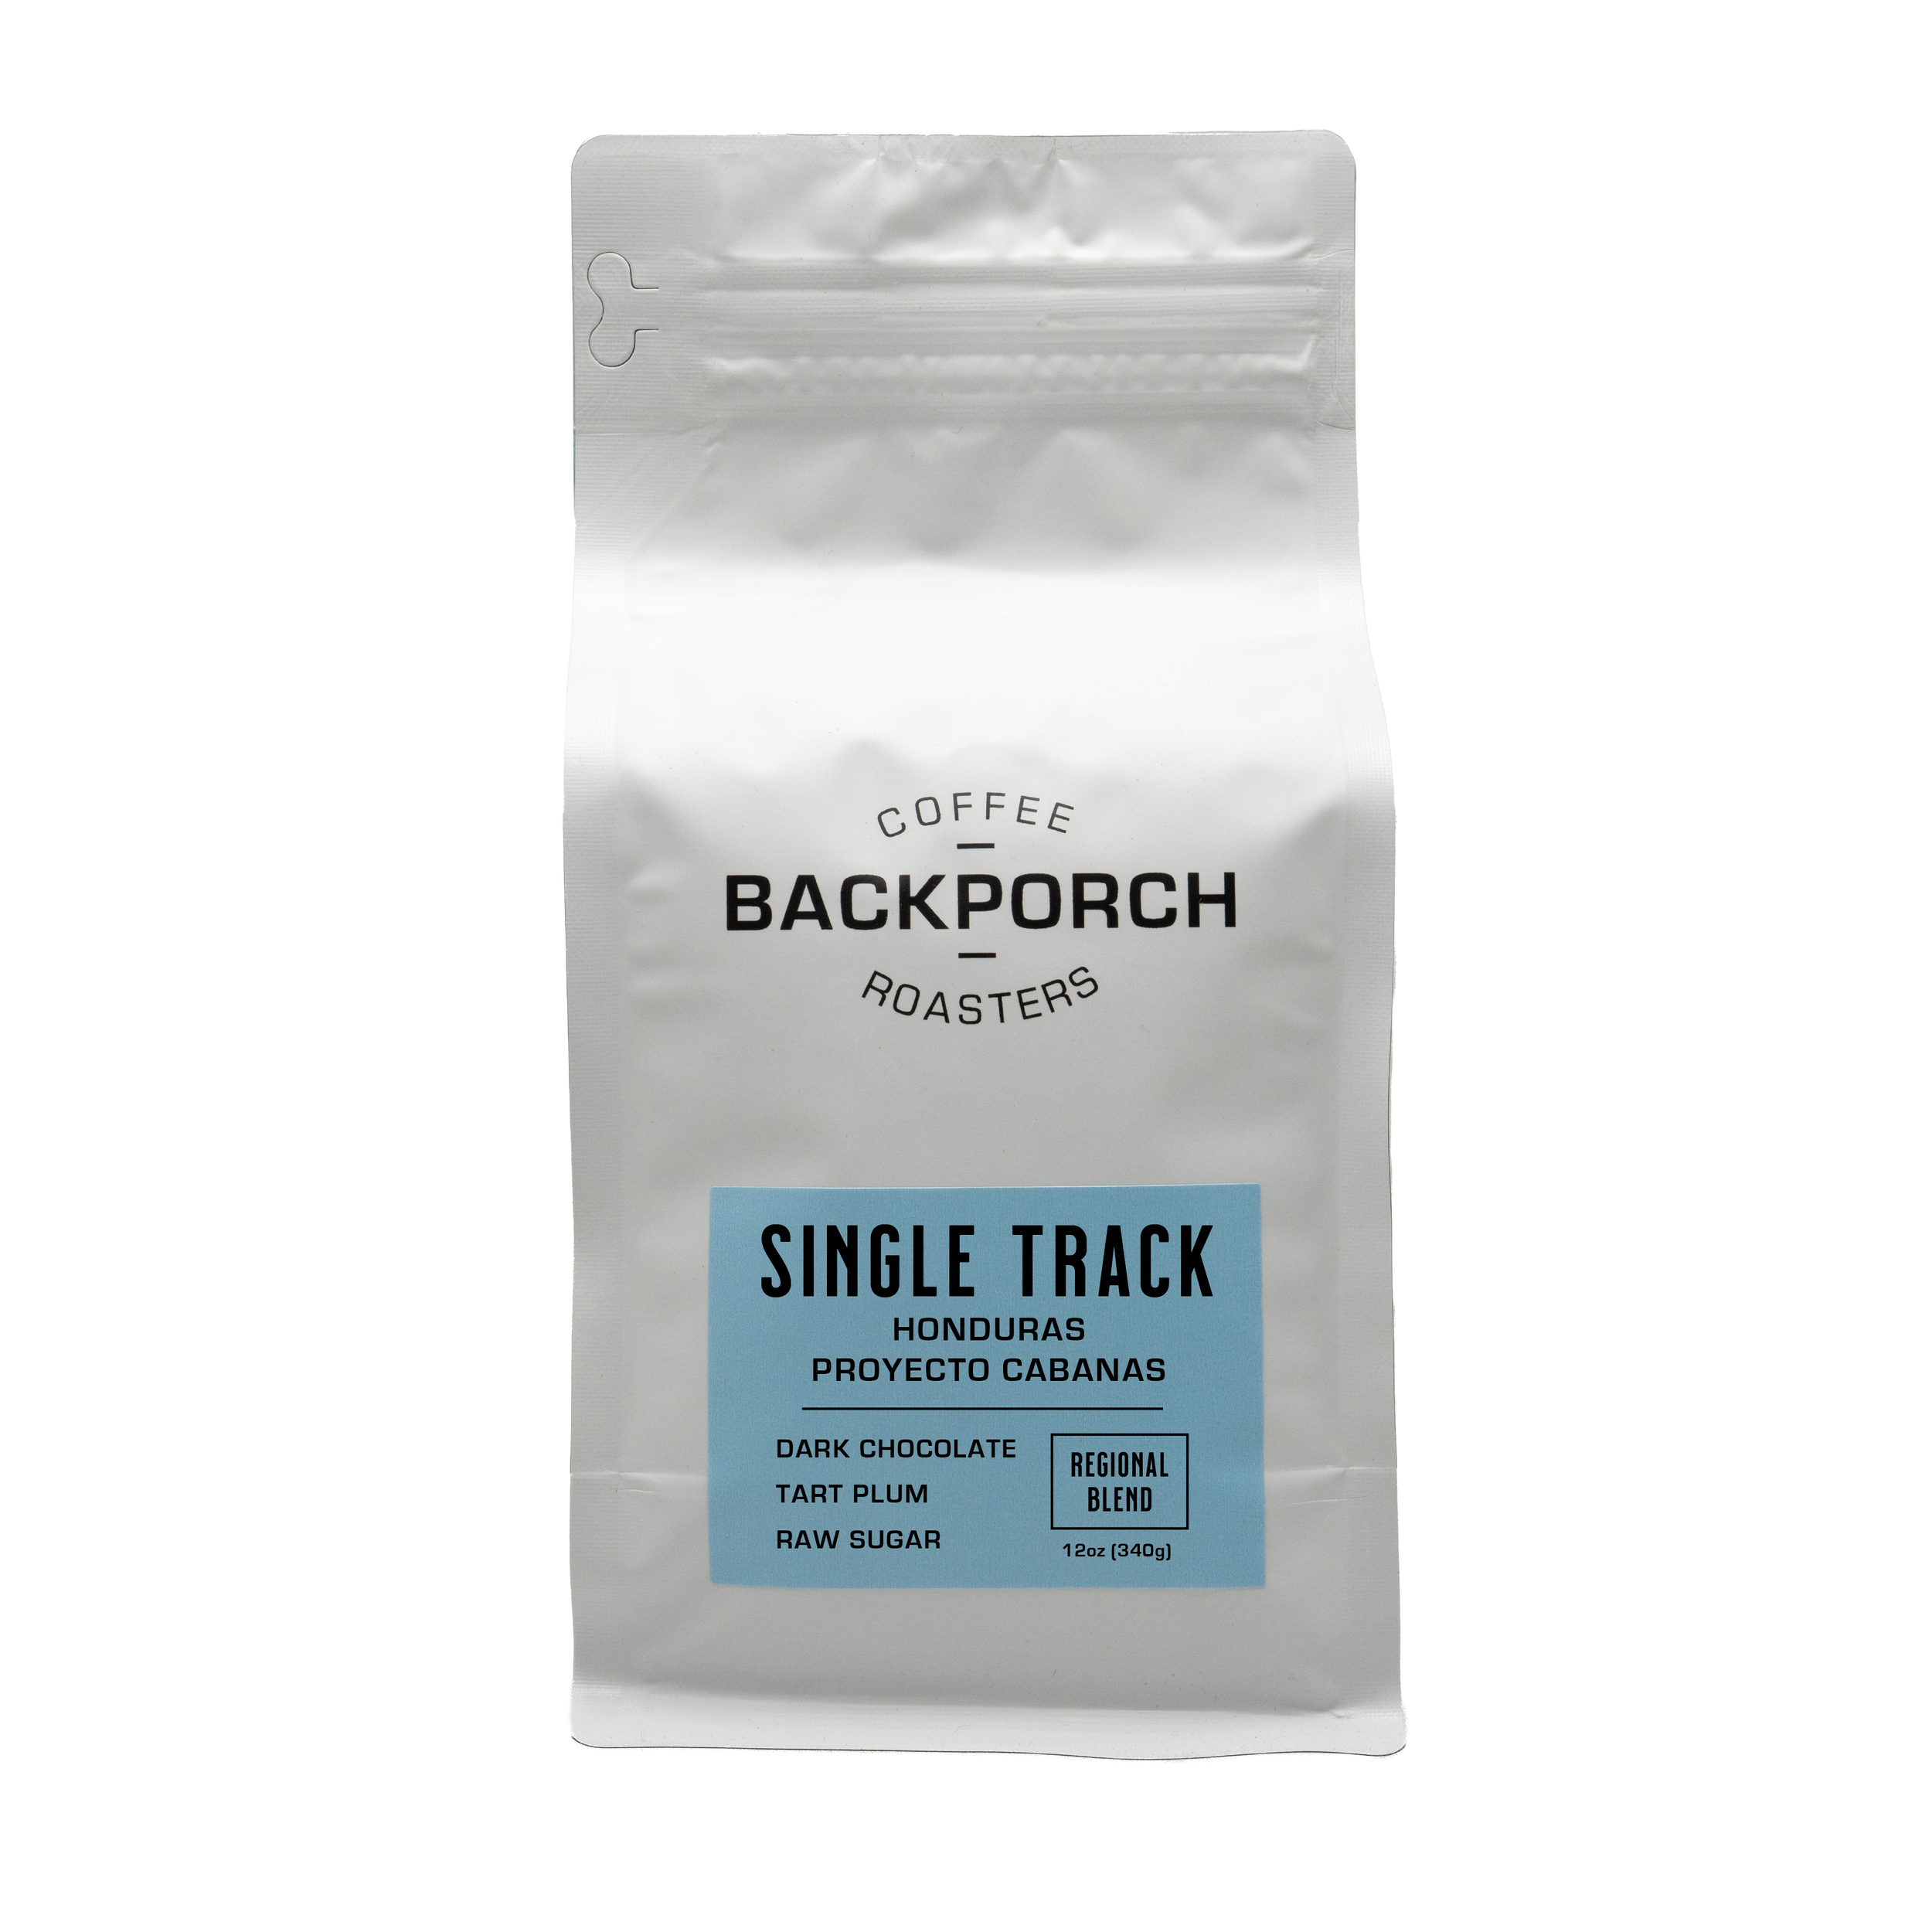 Ratio Six Brewer — Backporch Coffee Roasters